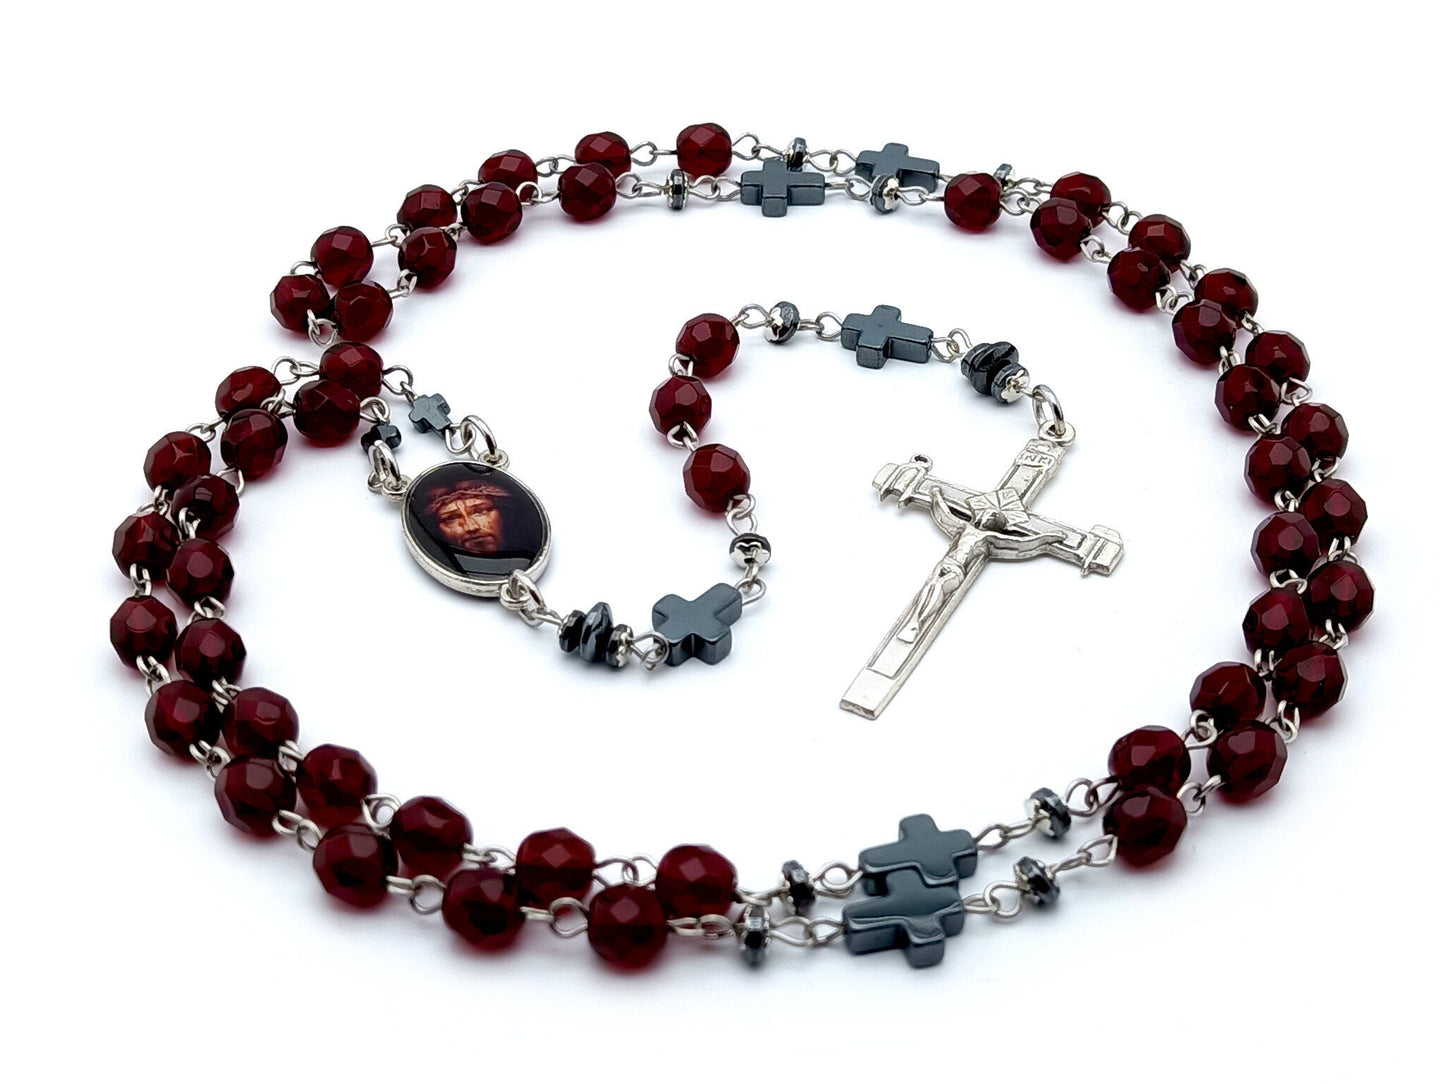 The Passion of Christ unique rosary beads with deep red glass faceted beads, hemitite pater beads, silver La Salette crucifix and picture centre medal.